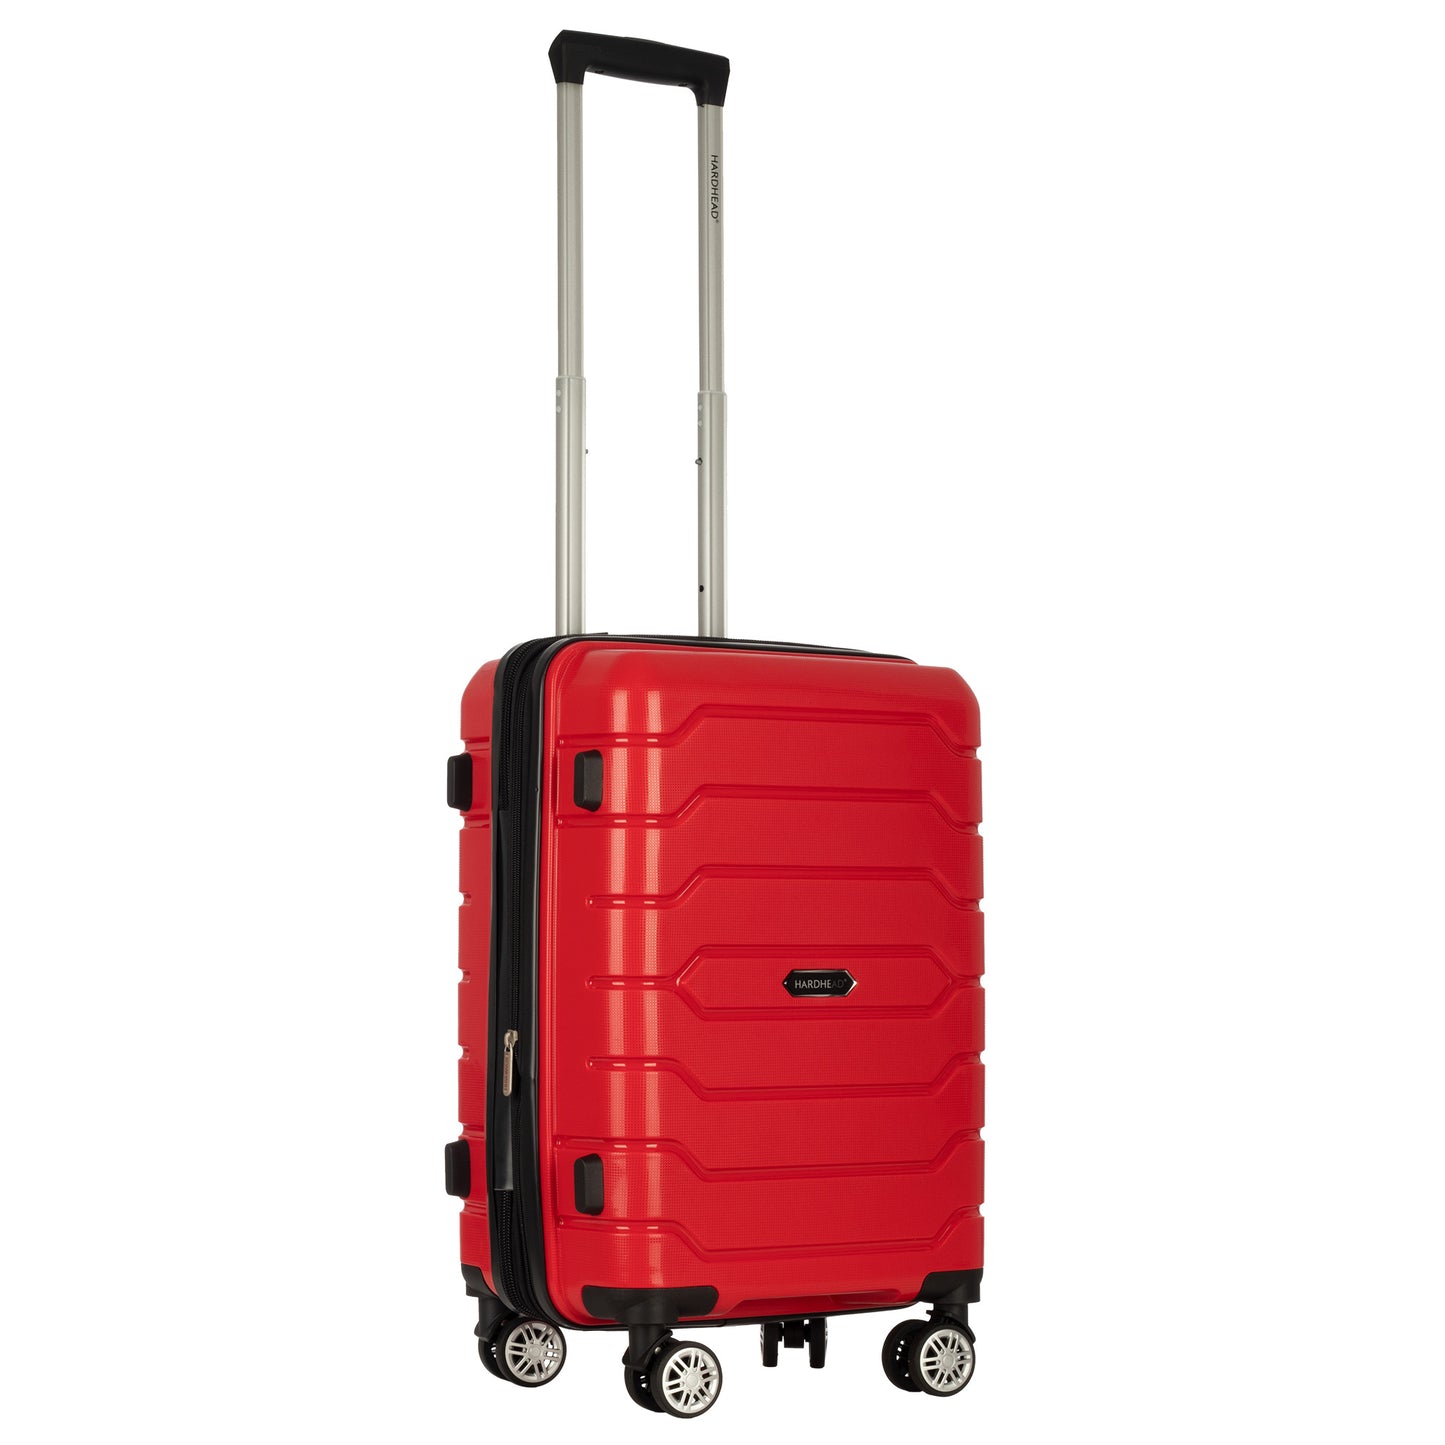 Hardhead Luggage (20") Suitcase Lock Spinner Hardshell IAN Collection Red